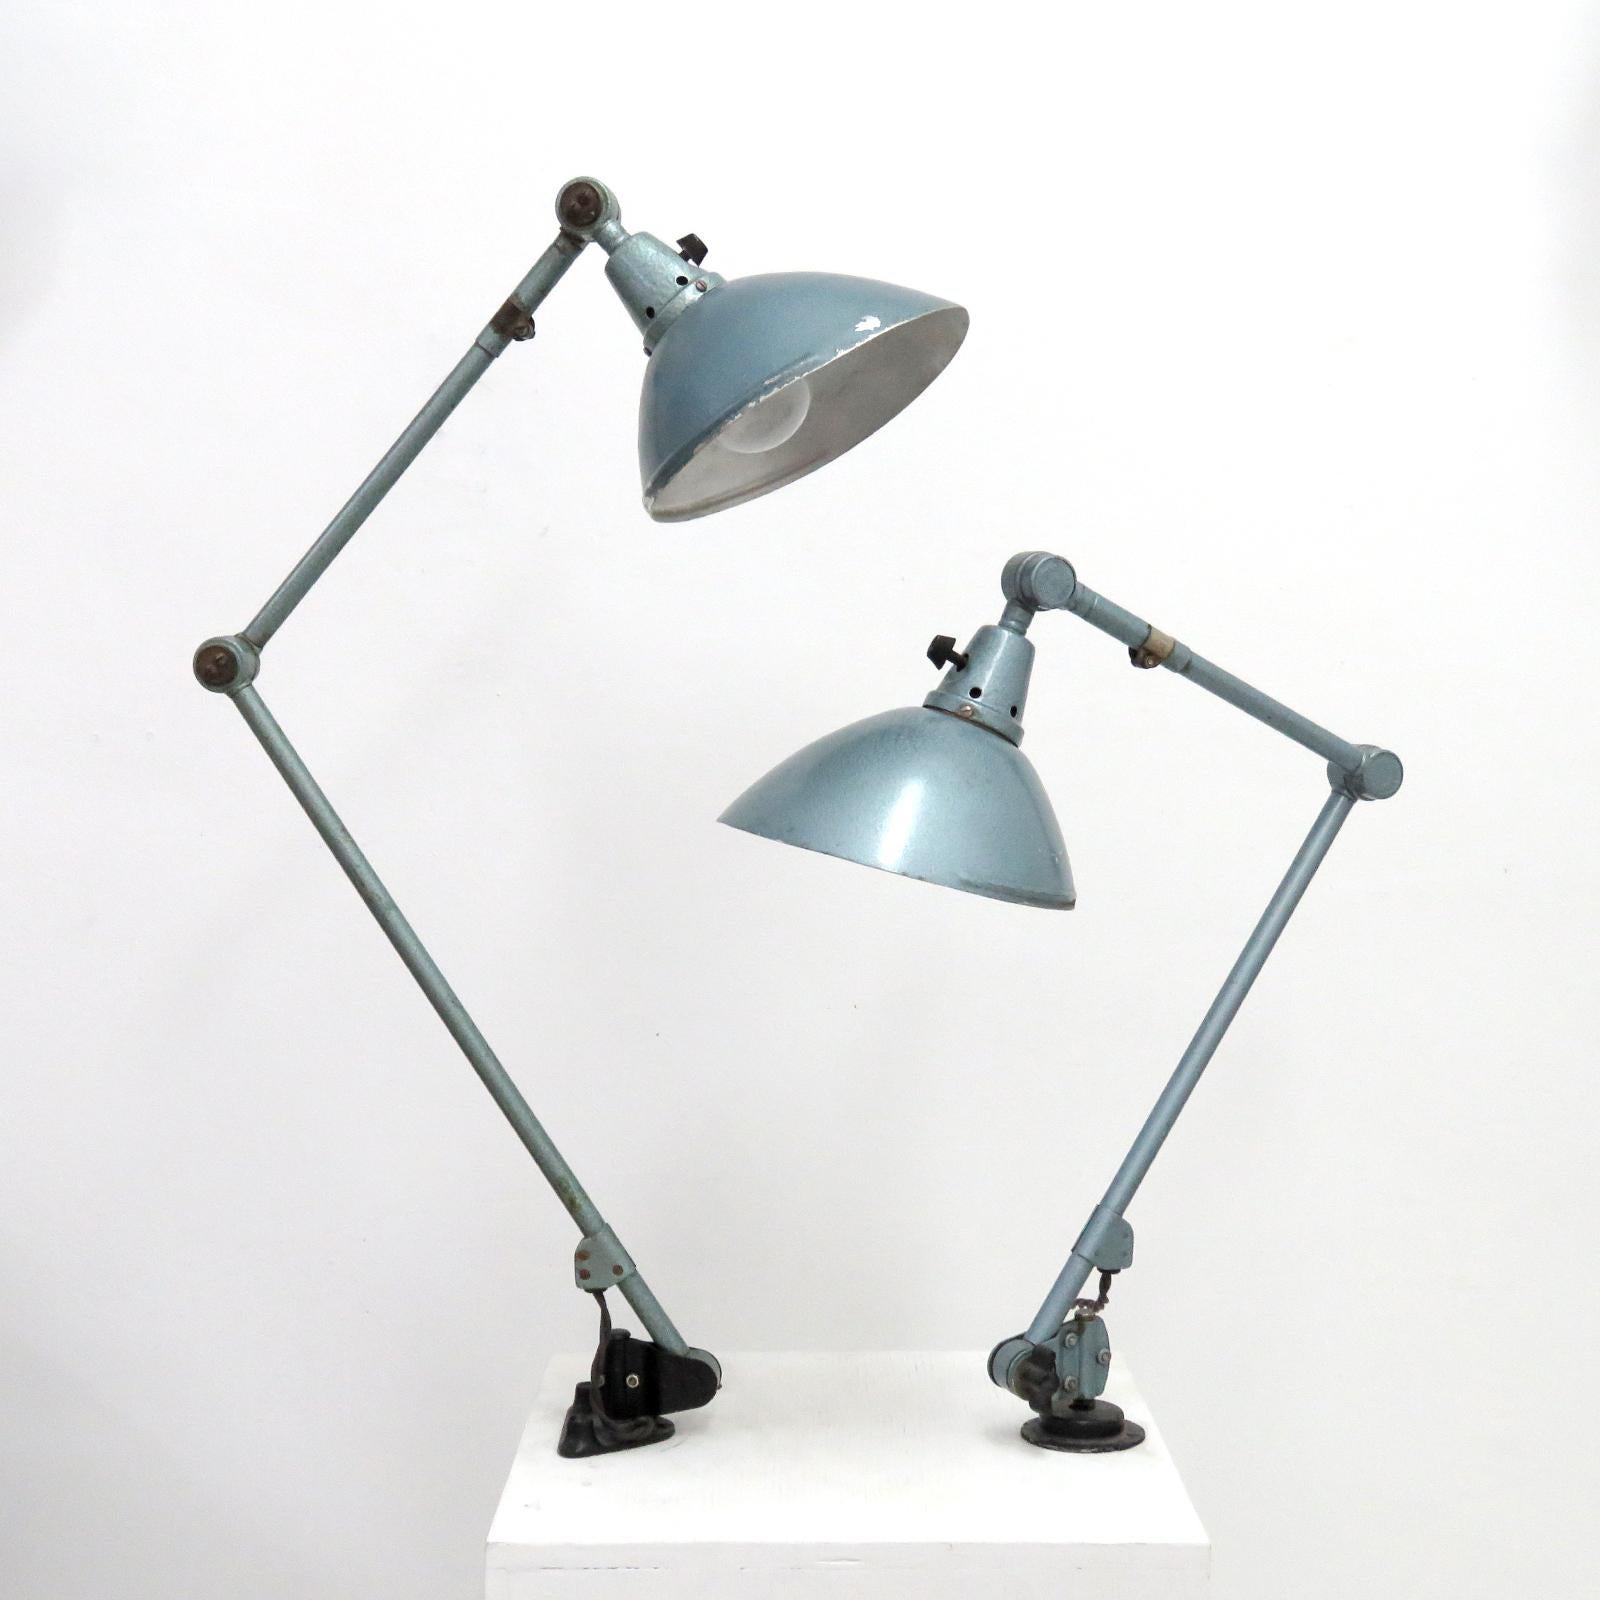 wonderful 1920s articulating table-mounted desk lamps by Curt Fischer for Midgard in original grey-green hammer finish and on/off turn switch on the shade, arm lengths of the smaller lamp 18